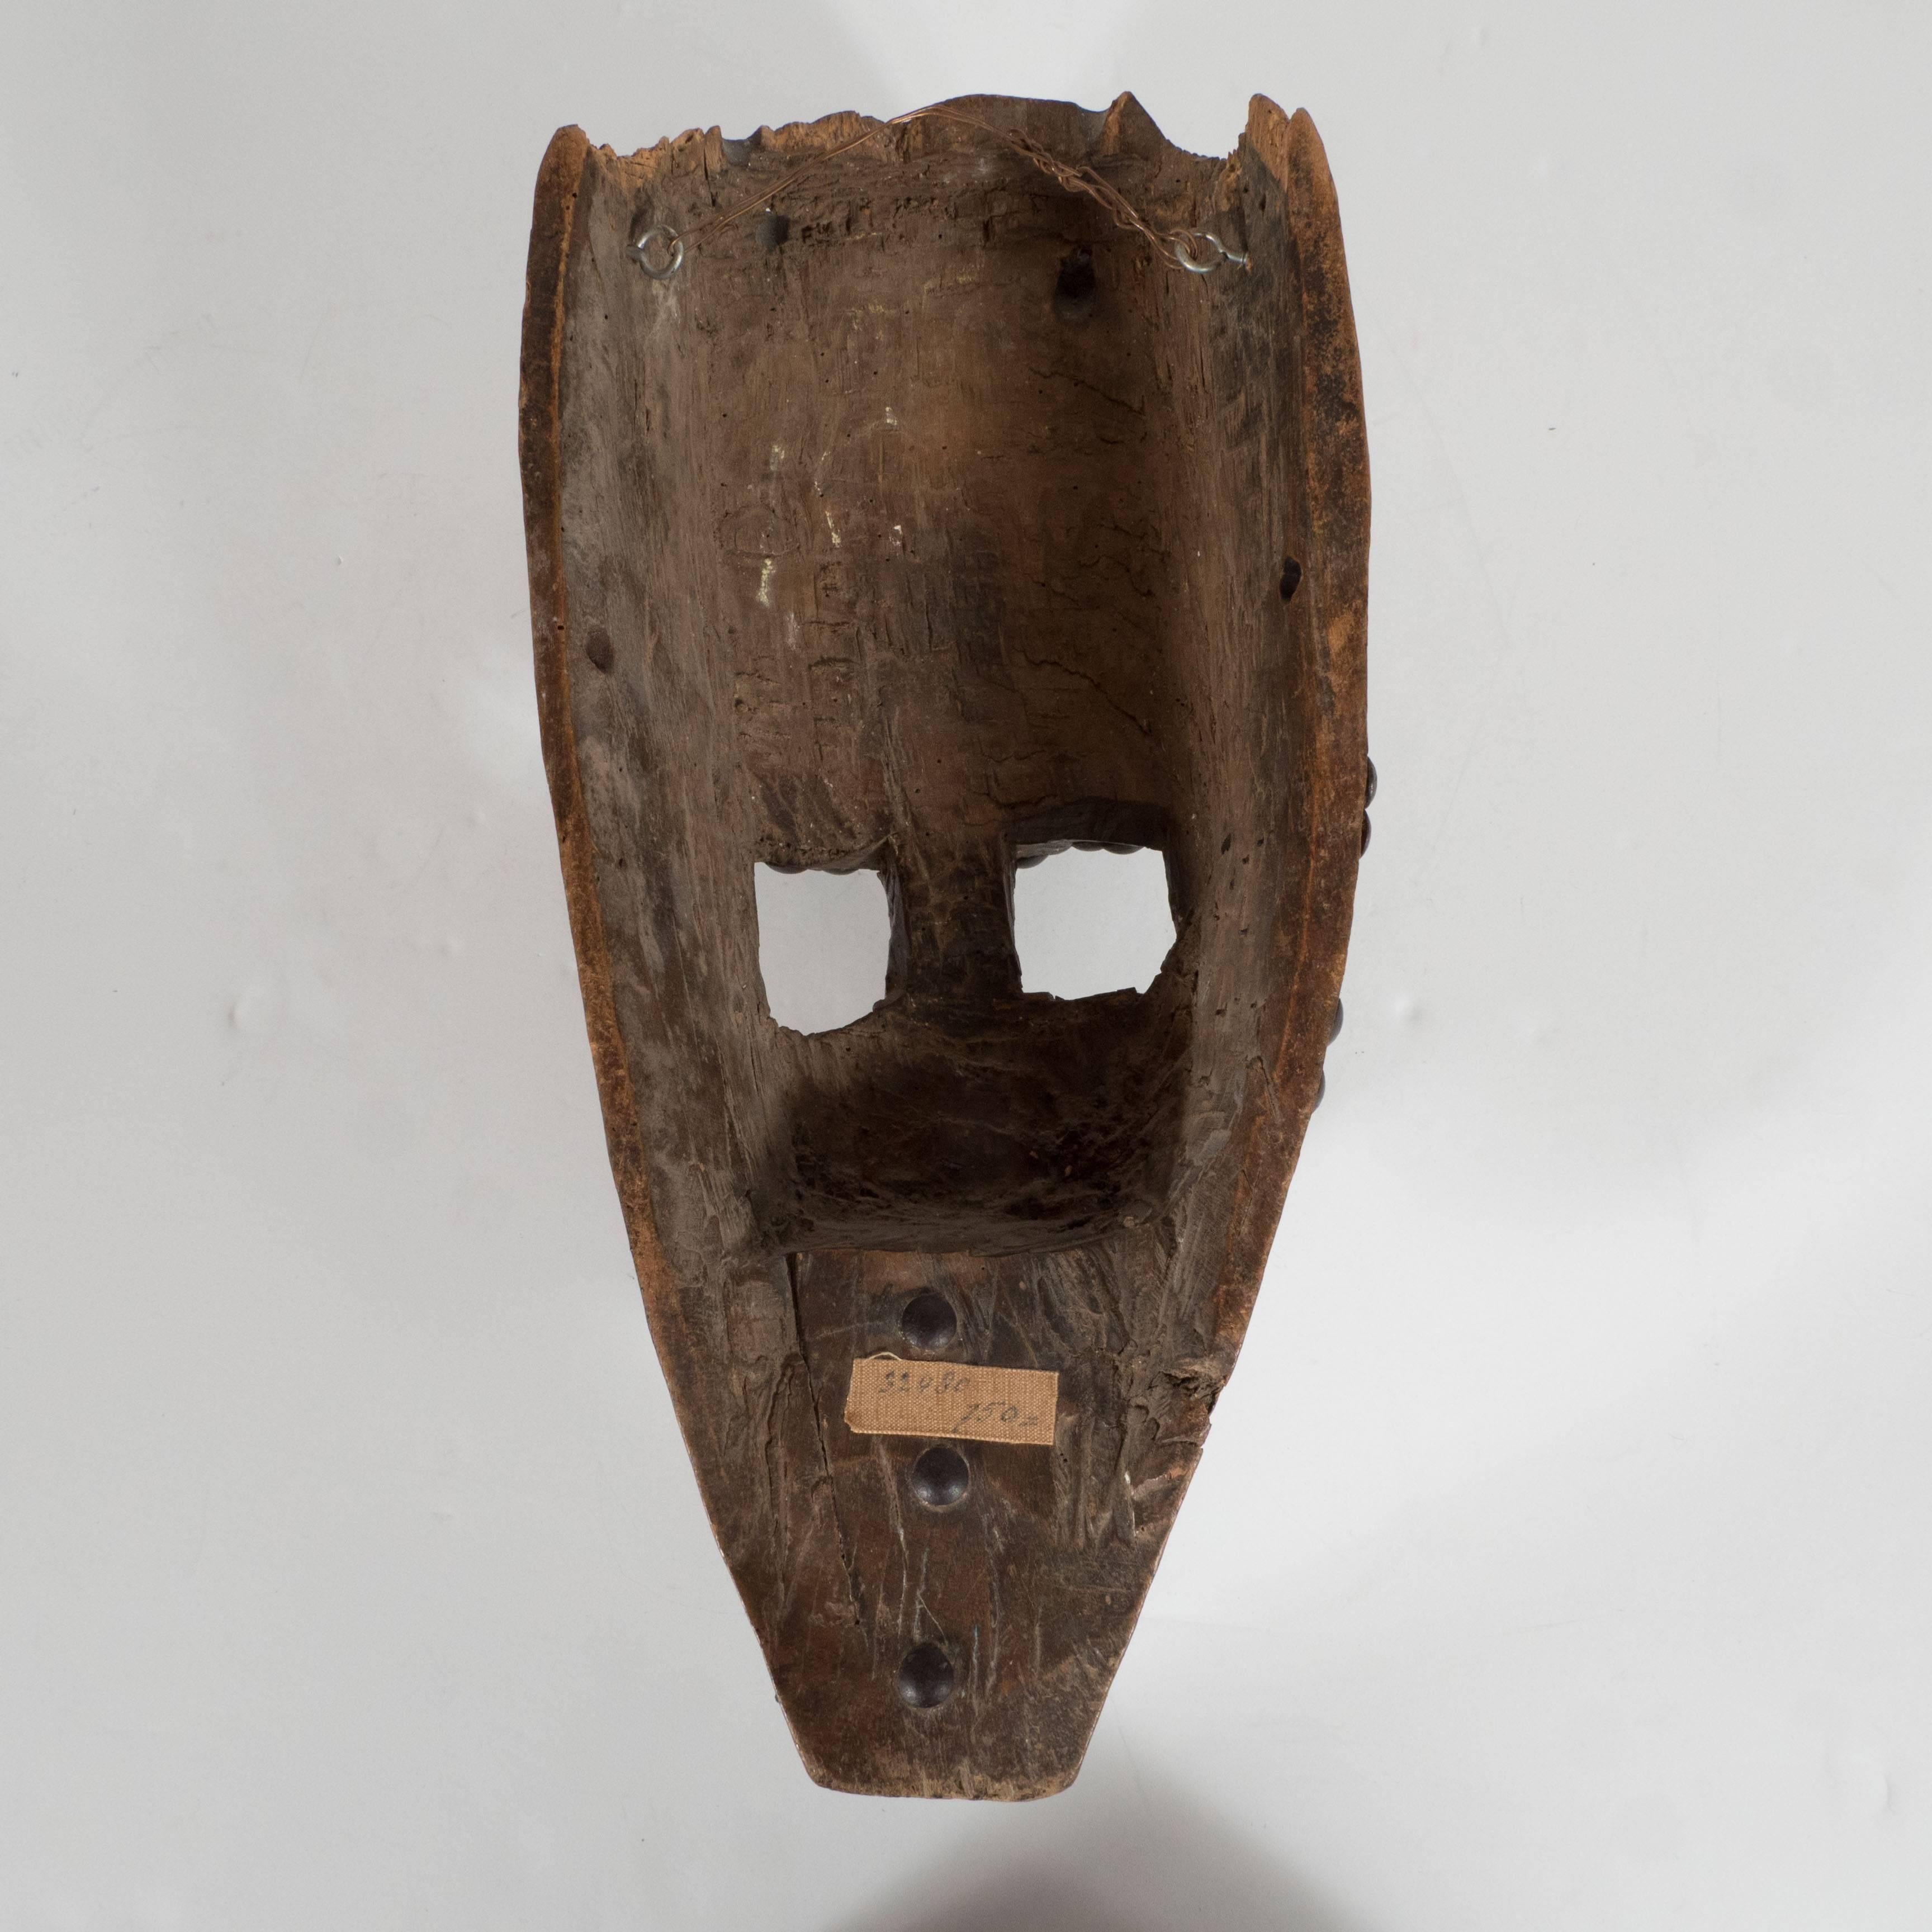 19th Century African Marka Mask from Mali Authenticated by Sotheby's - Brown Figurative Sculpture by Unknown